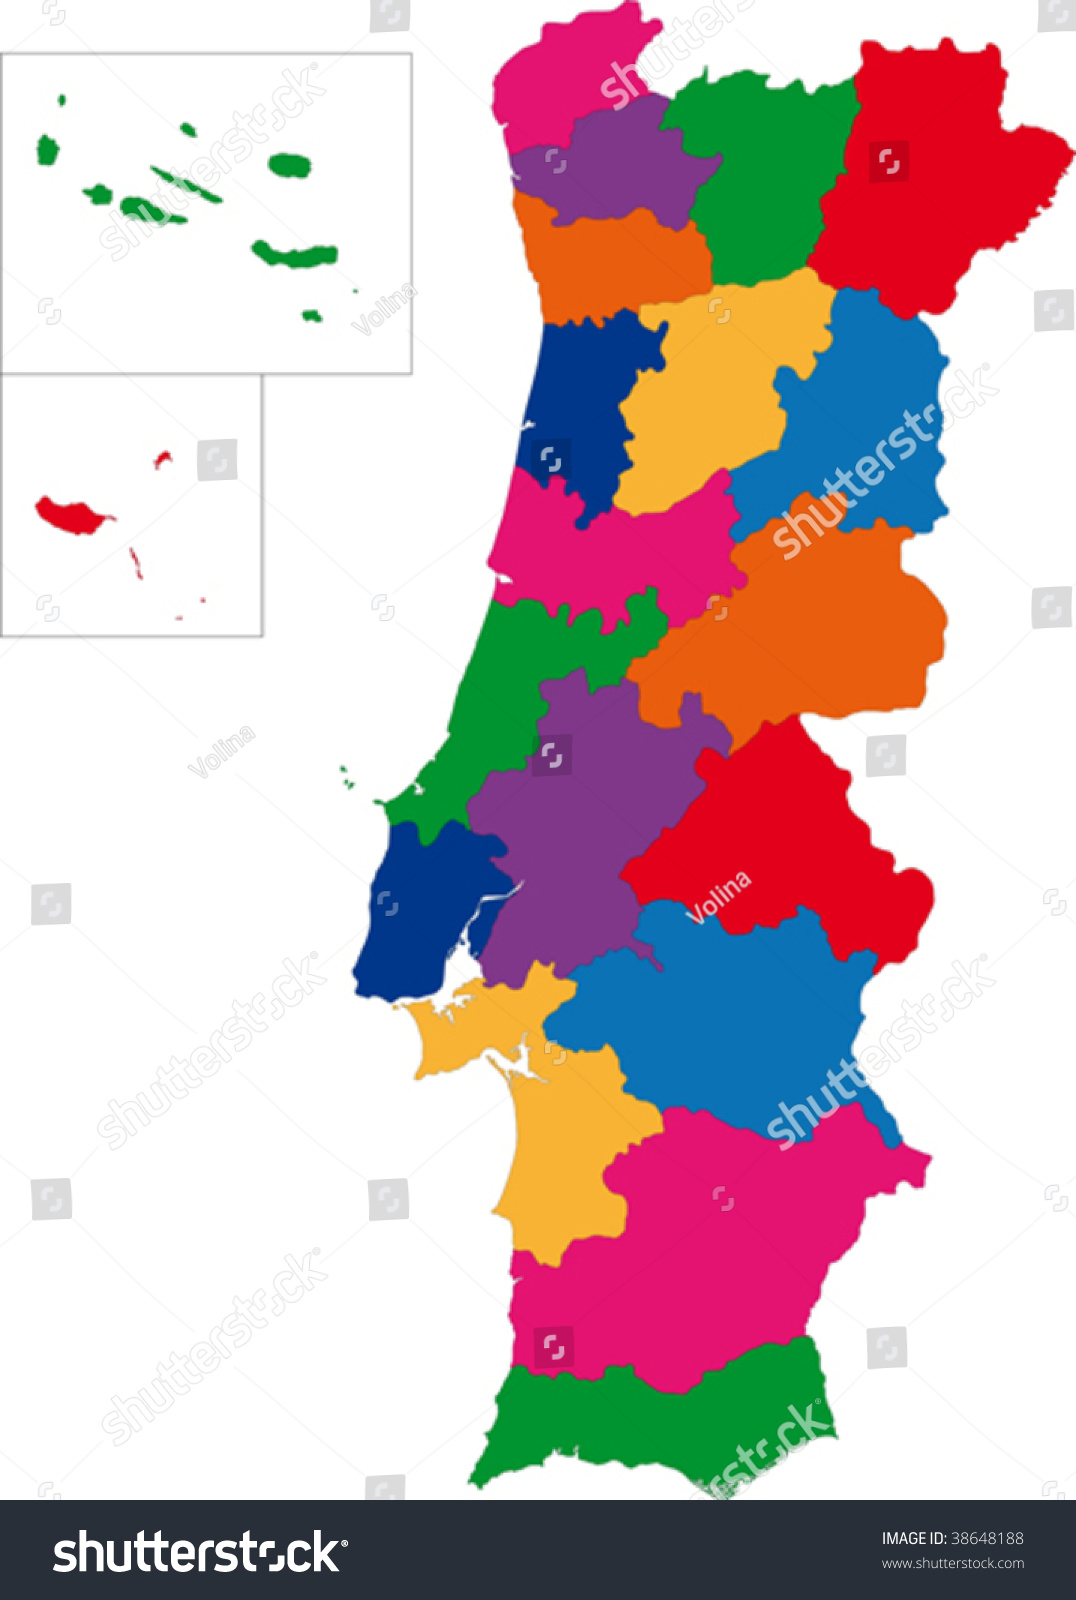 Map Administrative Divisions Portugal Stock Vector 38648188 Shutterstock 7383